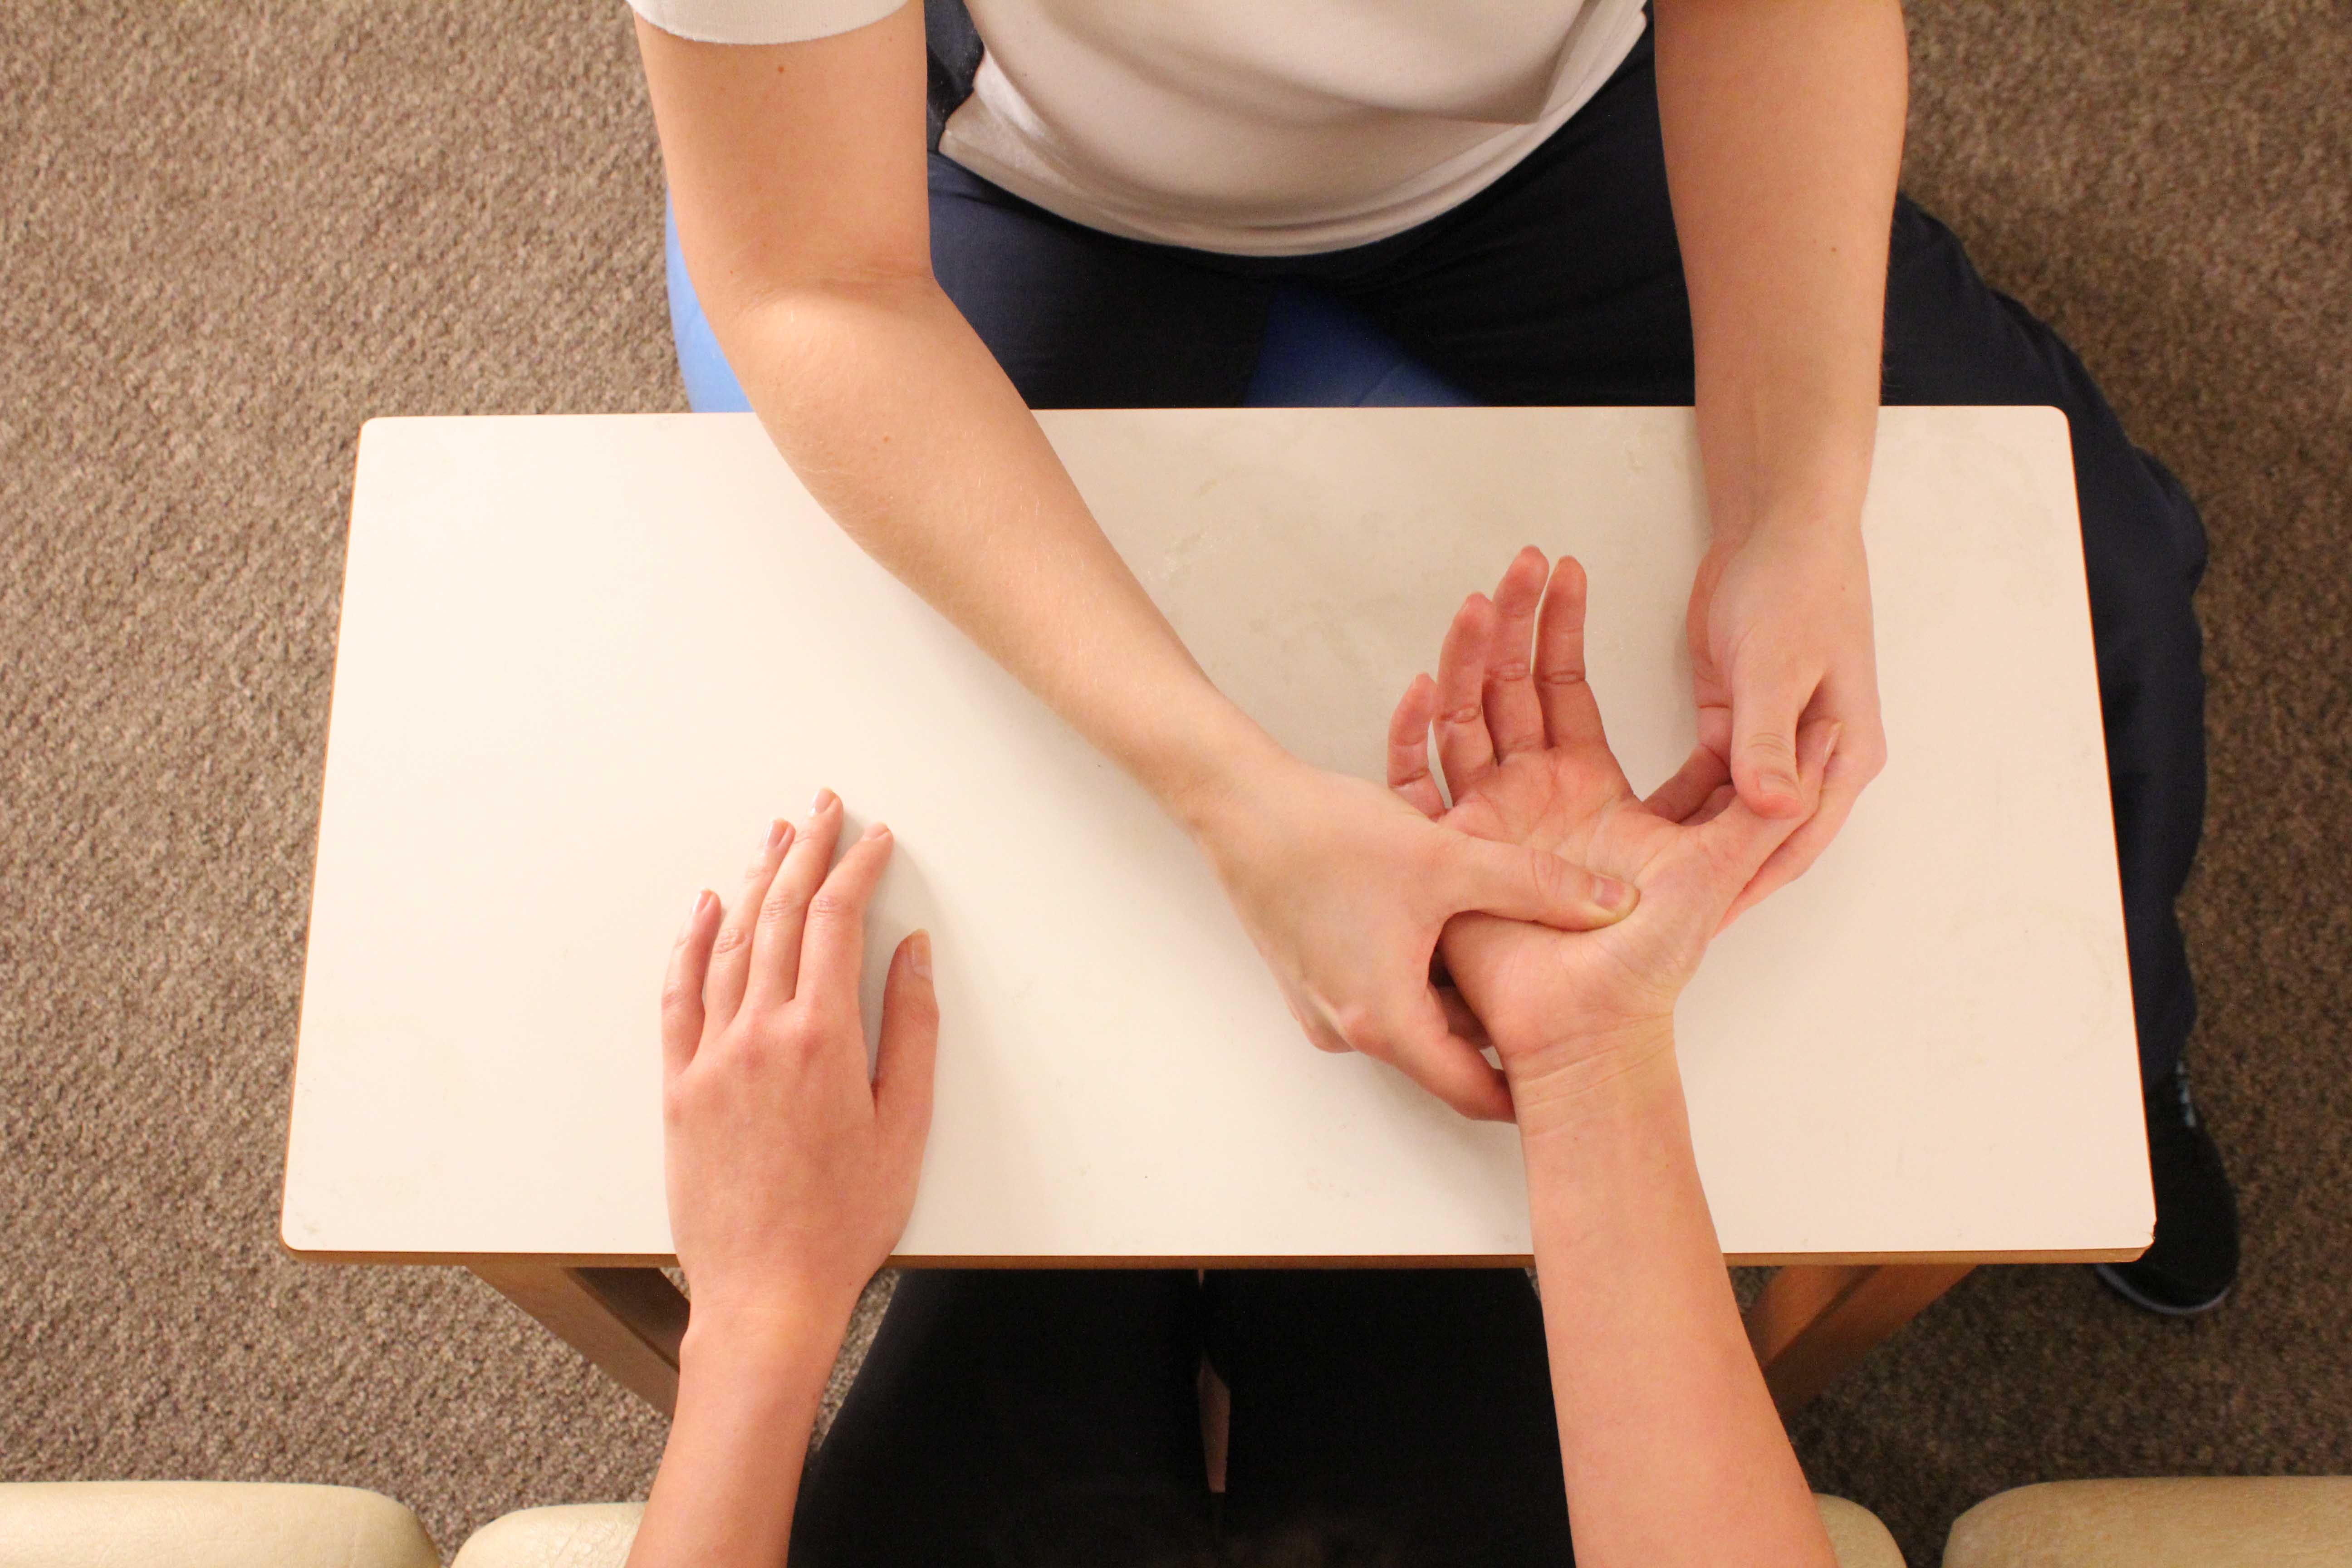 Specialist hand physiotherapy can help an individual regain strength and flexibility following a break.